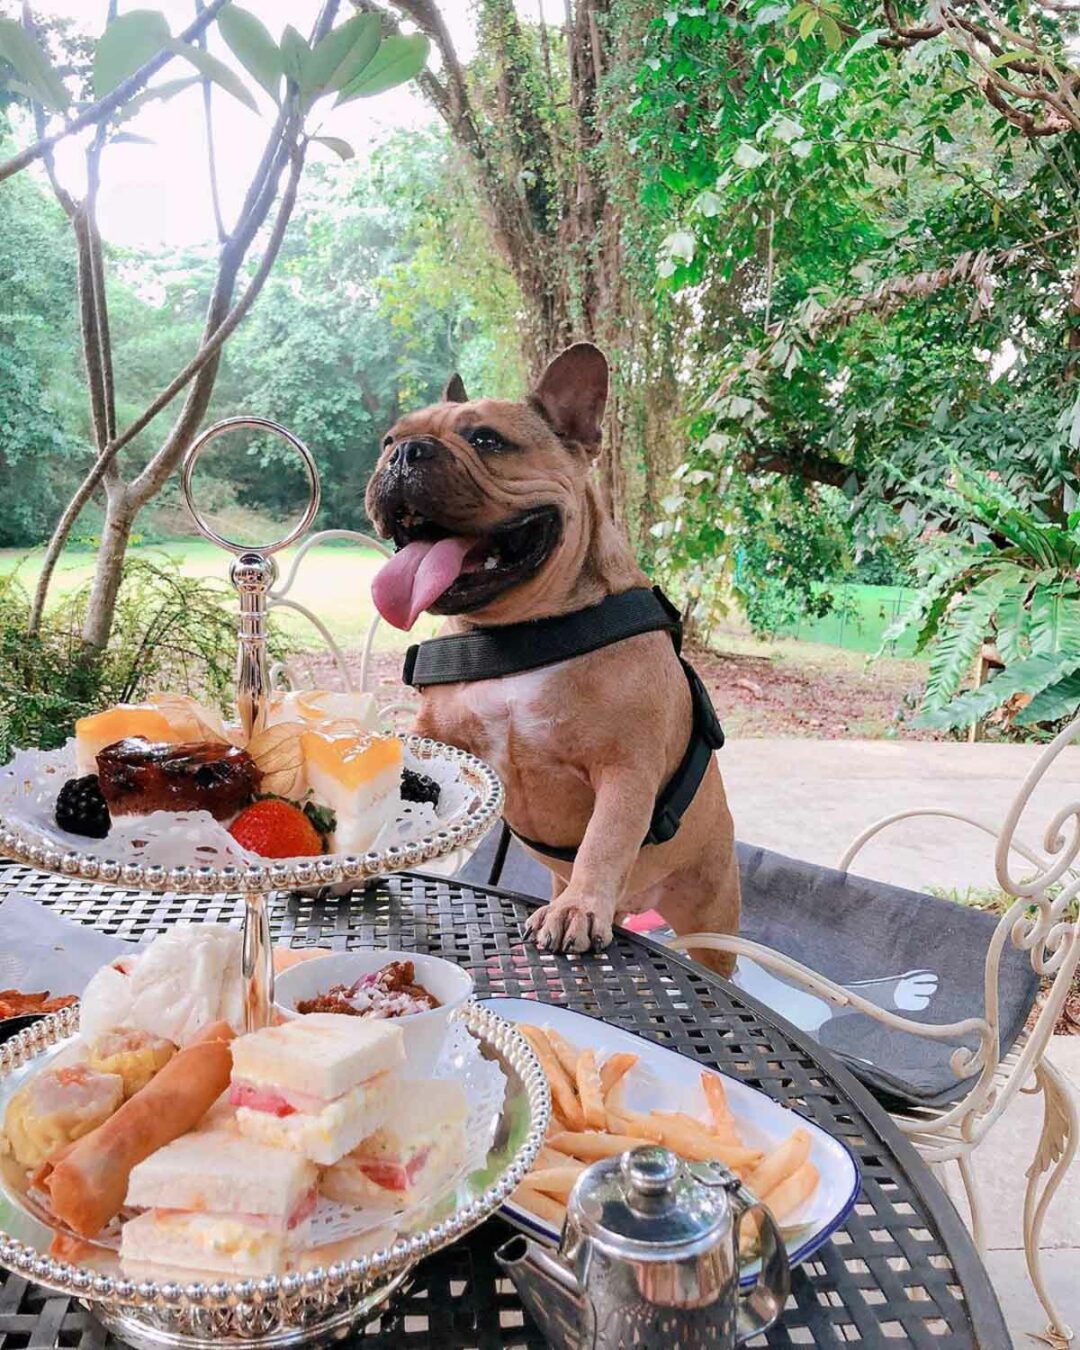 8 Pet-Friendly Cafes In Singapore With Food For Both You And Your Dog